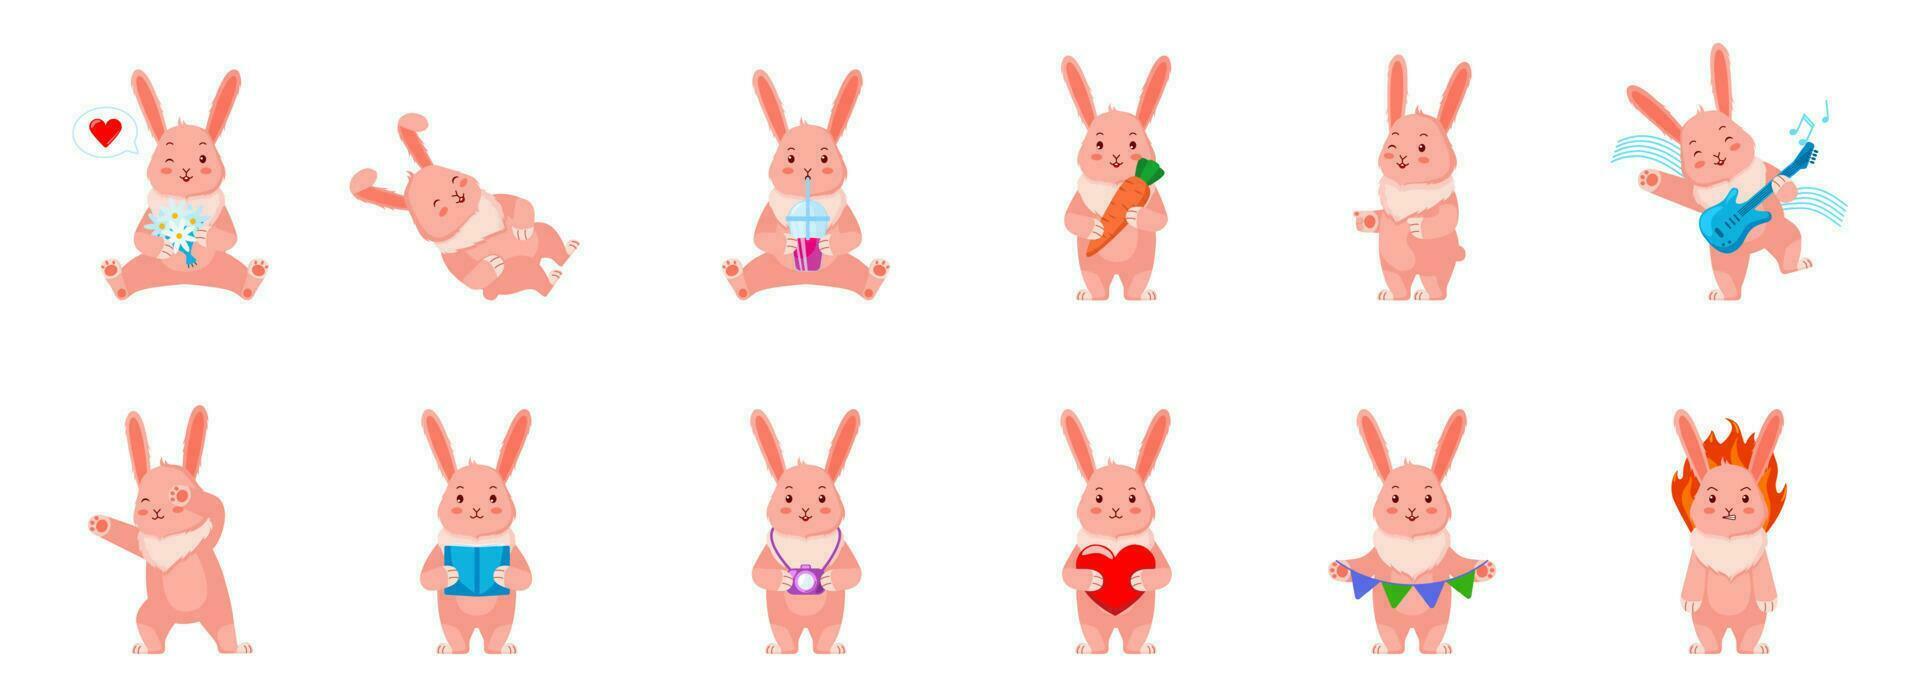 Collection of cute rabbit. Cartoon hare character design set. Bunny in various poses and emotions vector